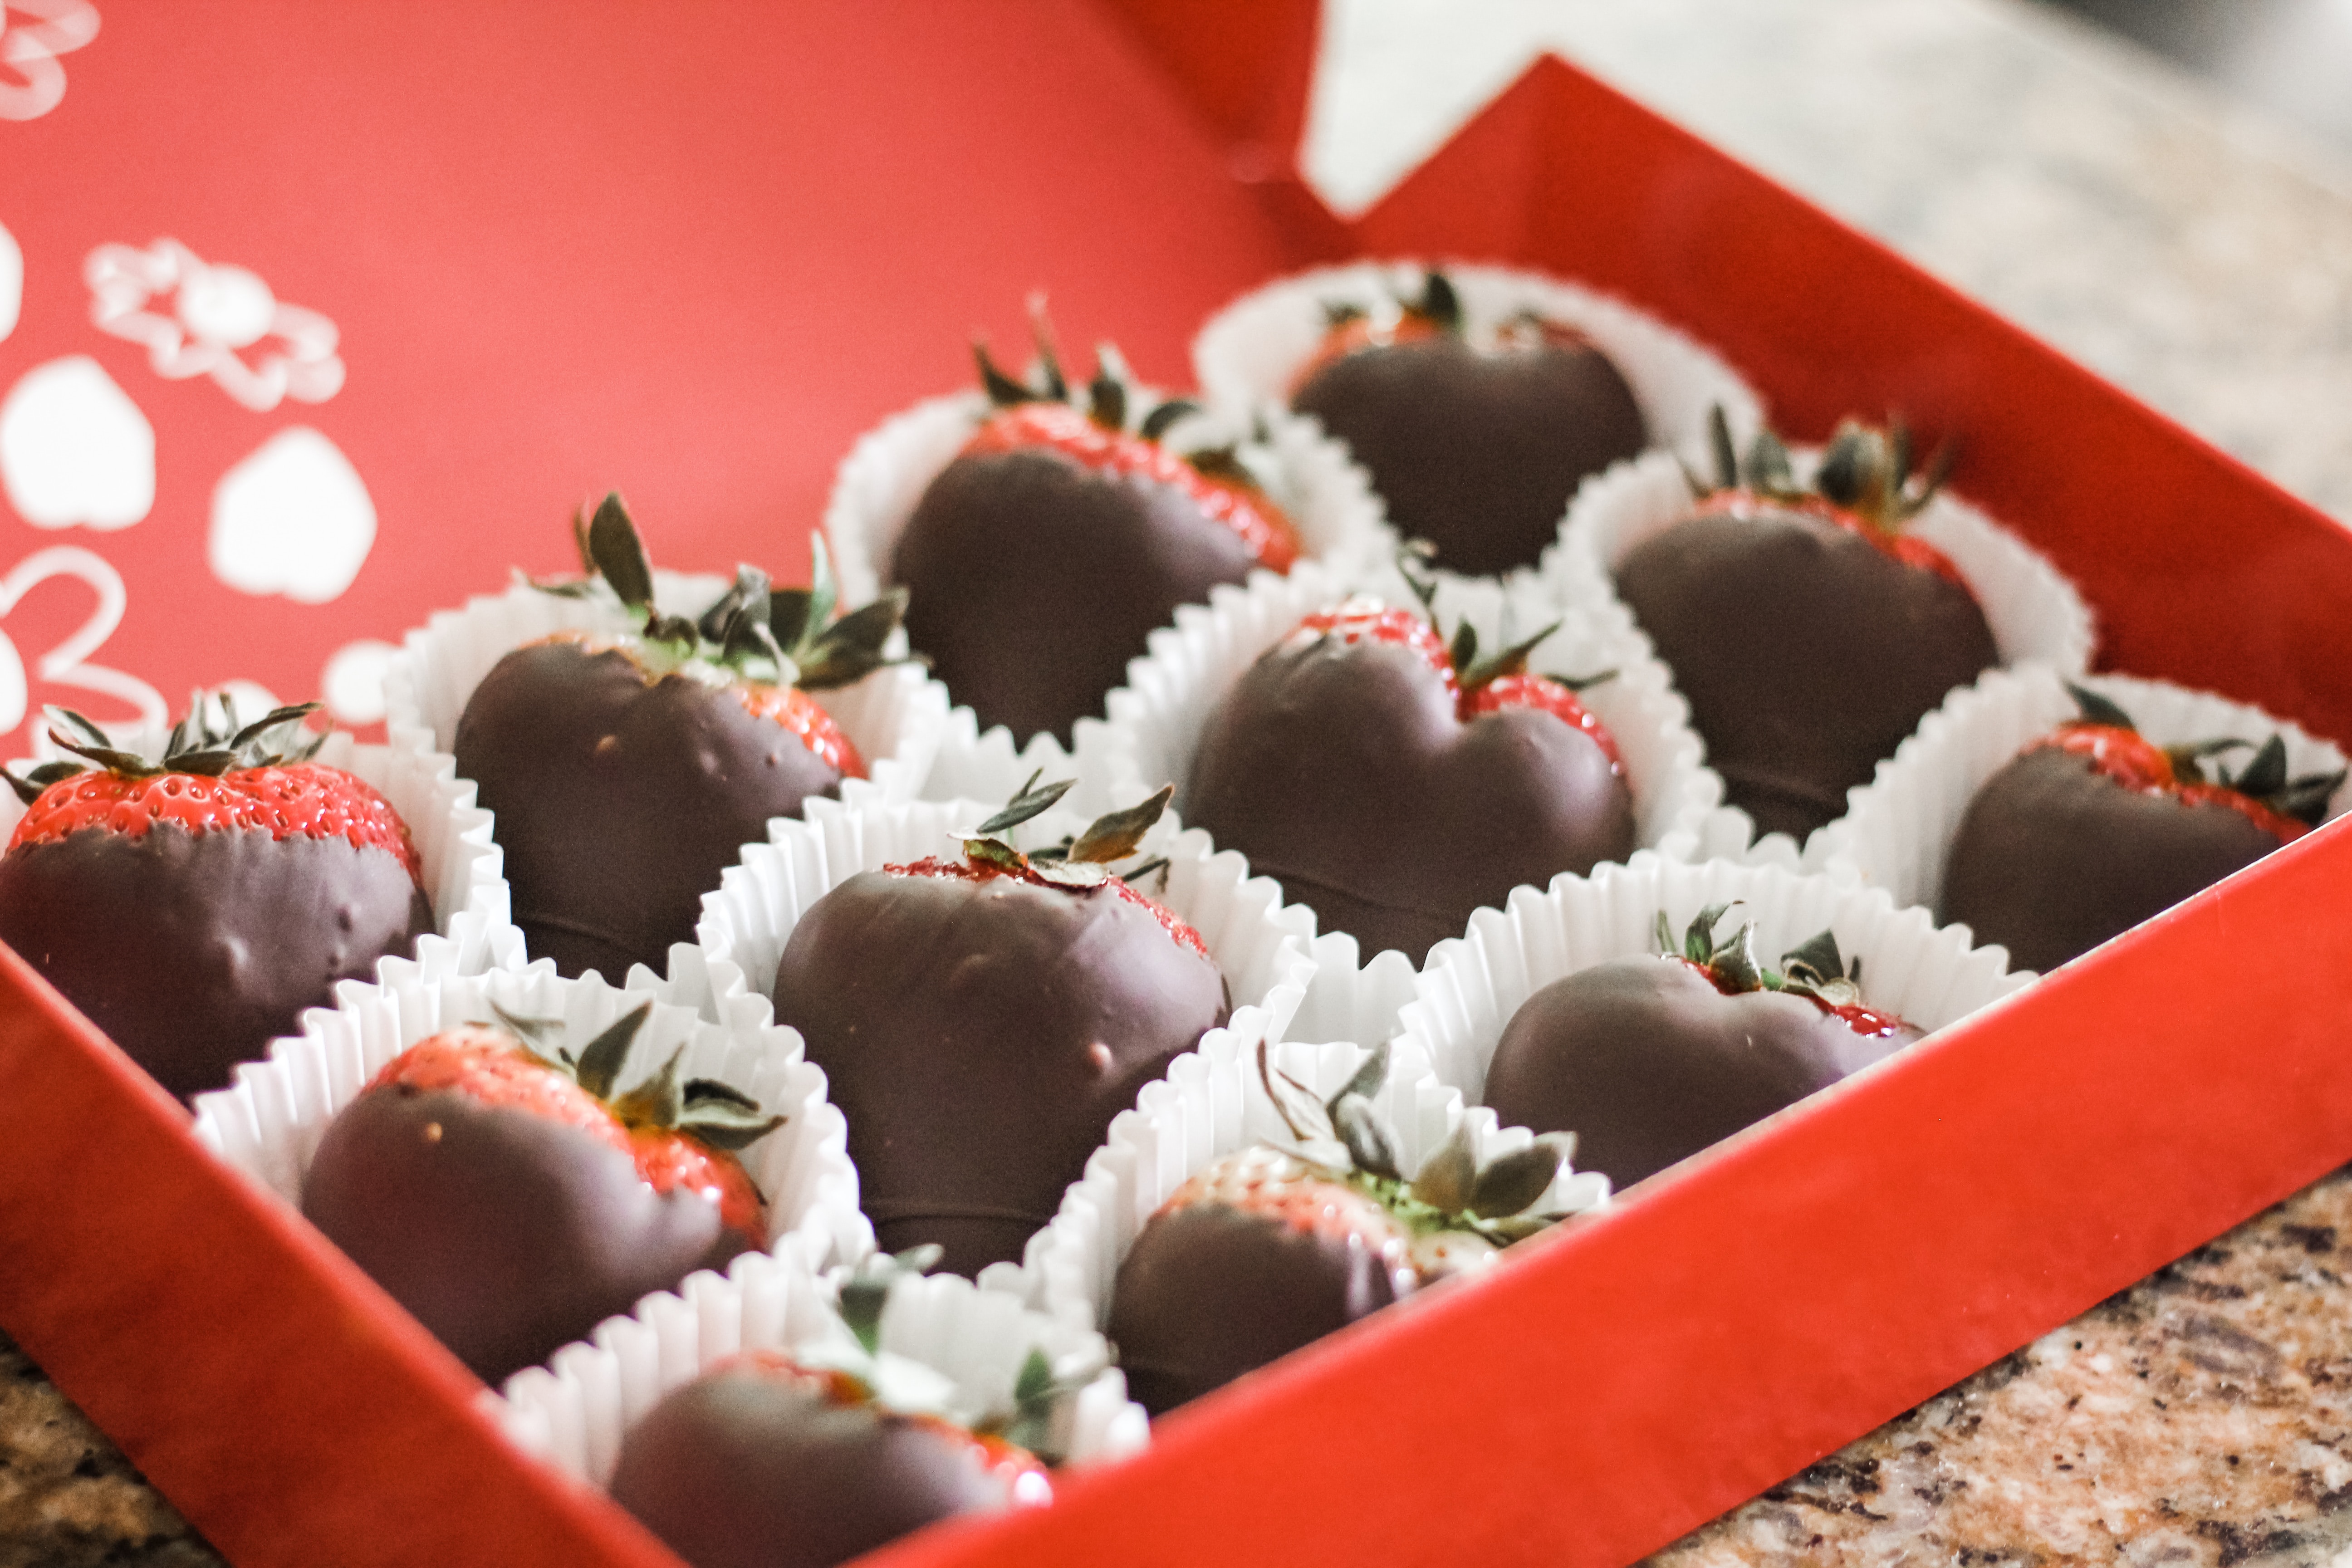 Red Valentine's box full of chocolate dipped strawberries in white wrappers